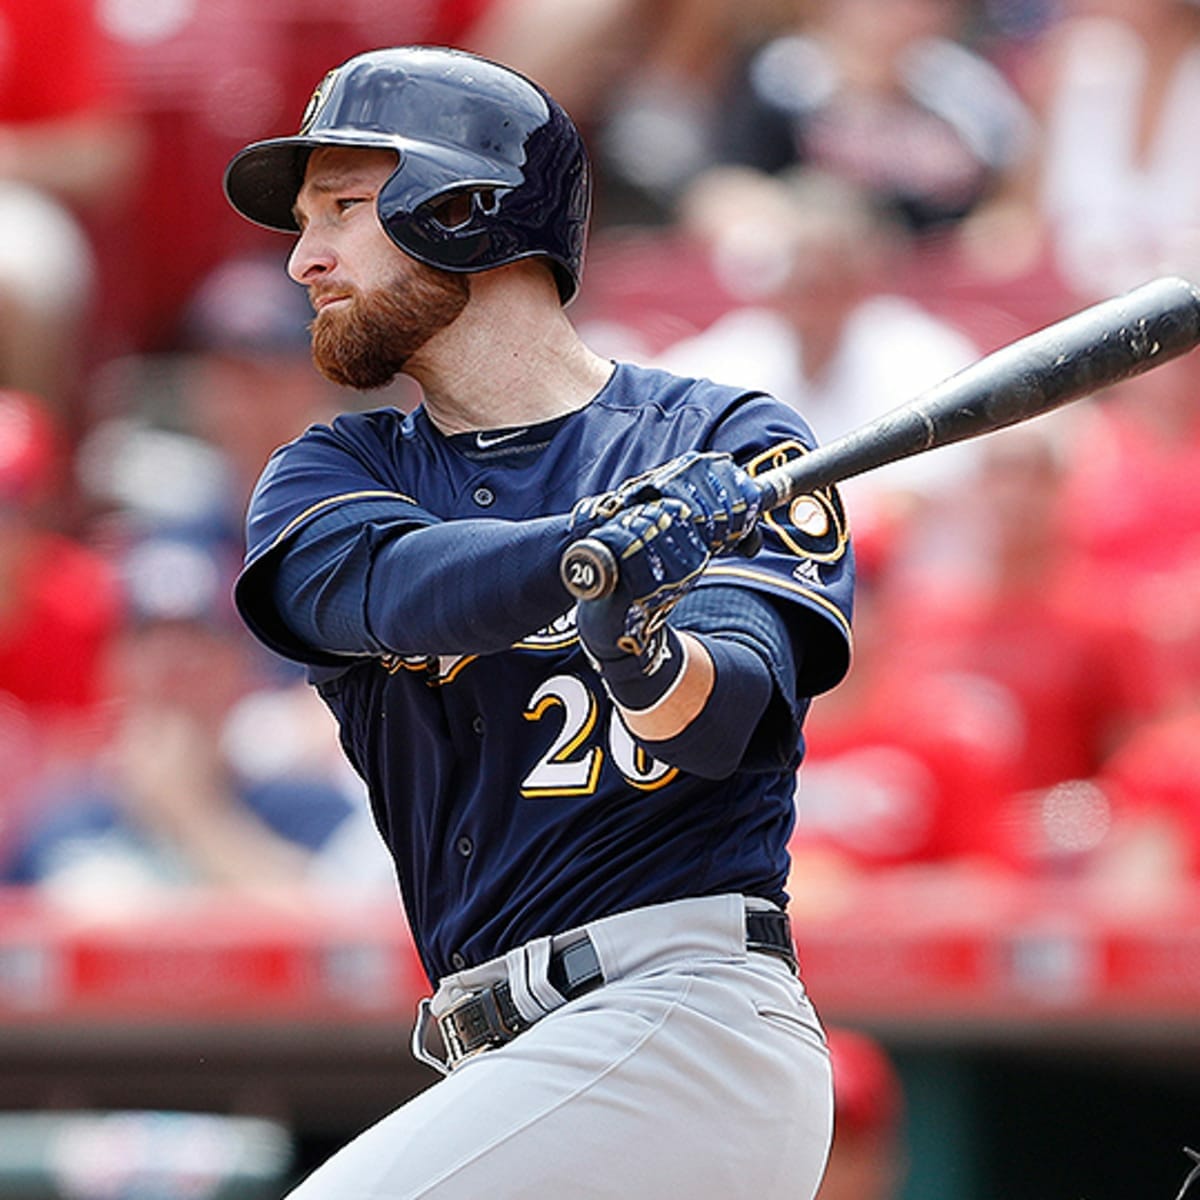 Former Brewers catcher Jonathan Lucroy to retire as a member of the team, Brewers